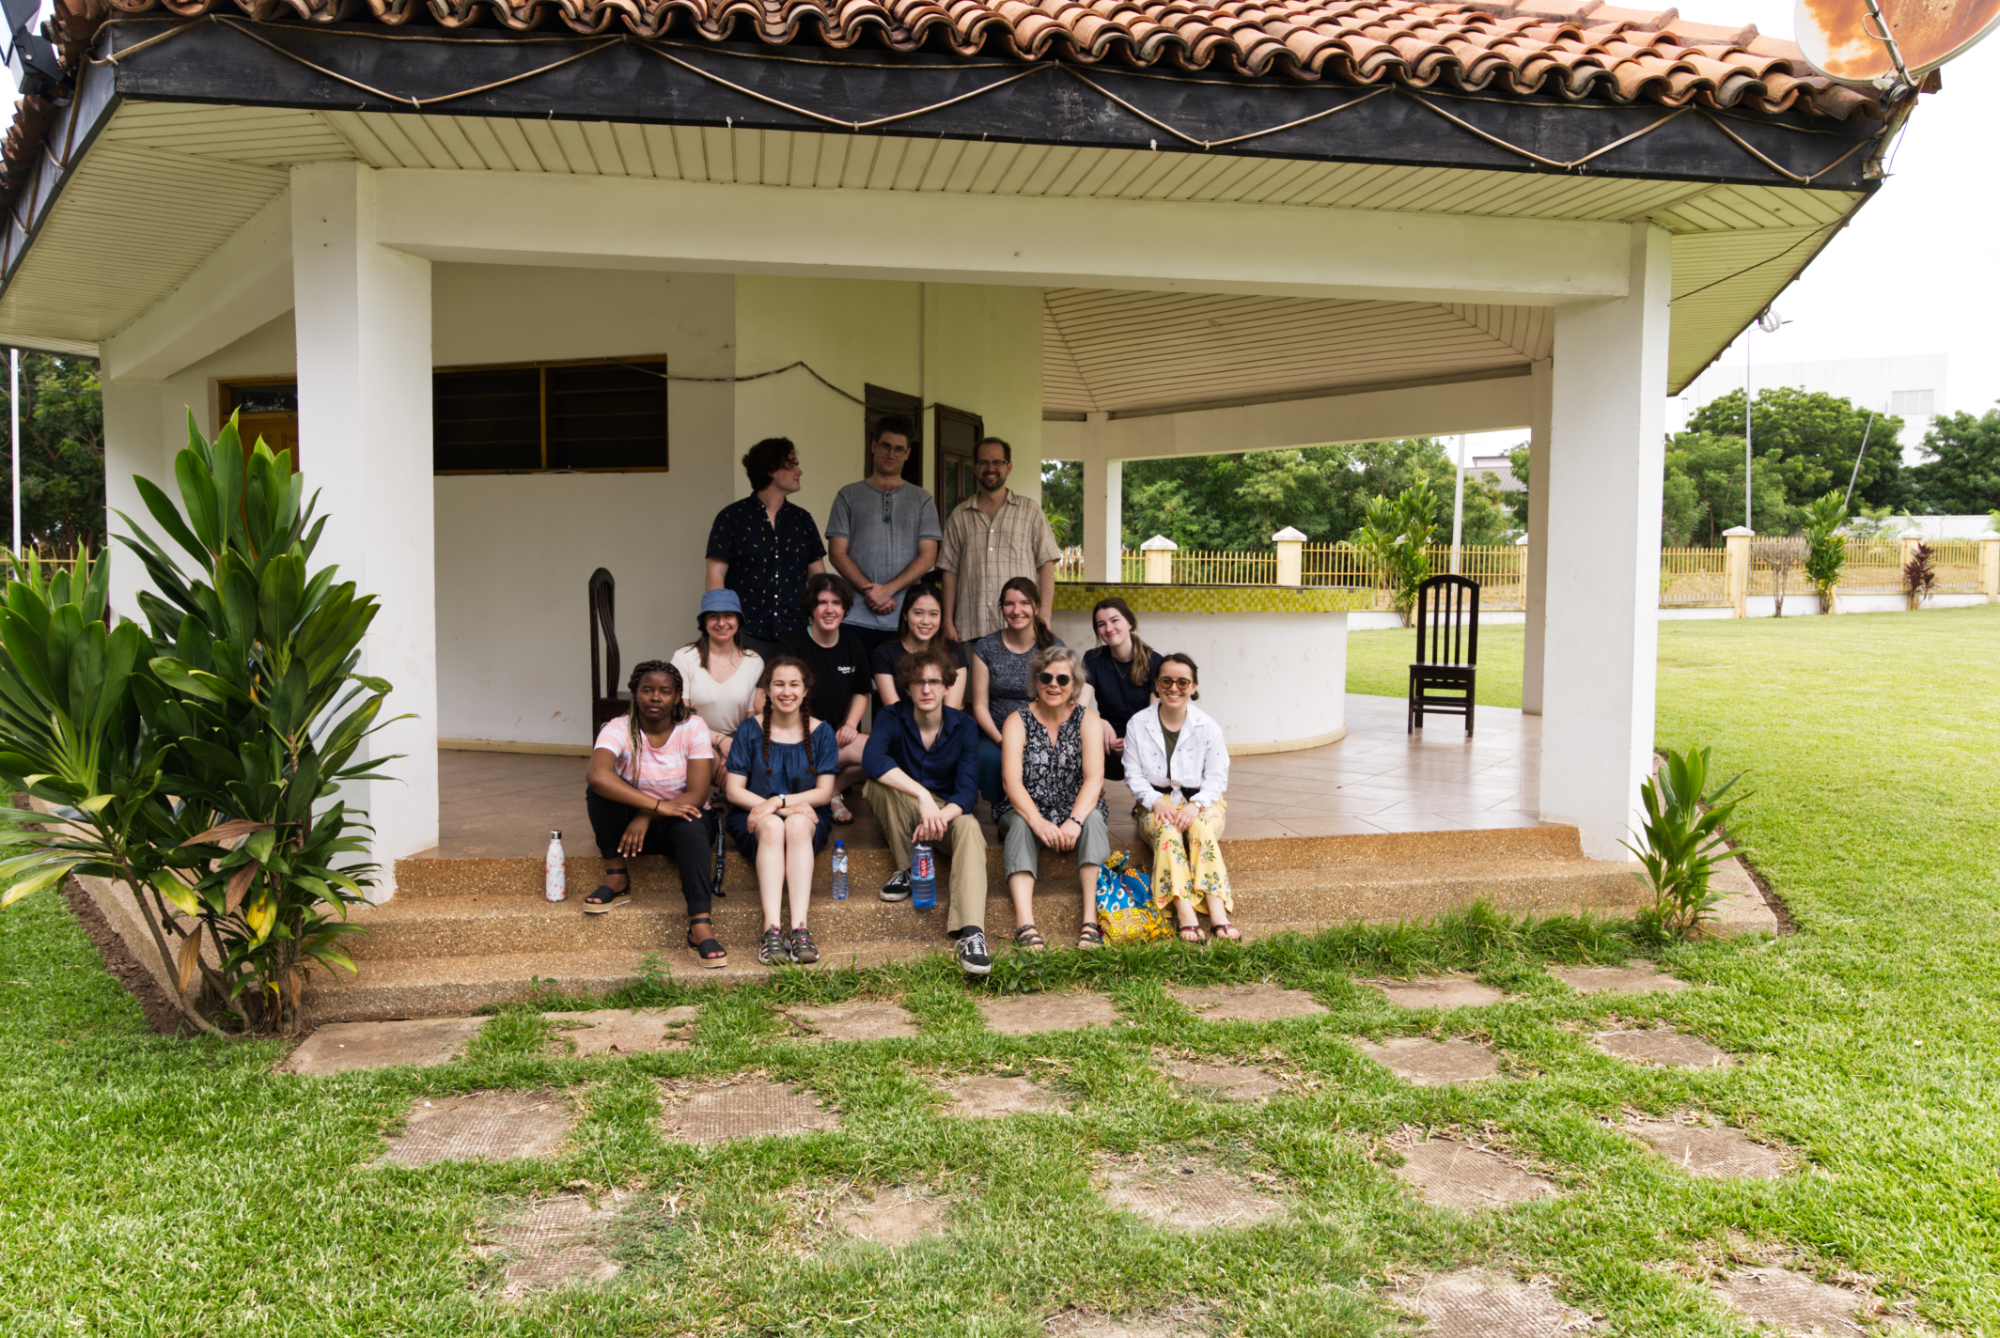 Group photo of Carleton students, faculty and staff upon arrival in Ghana